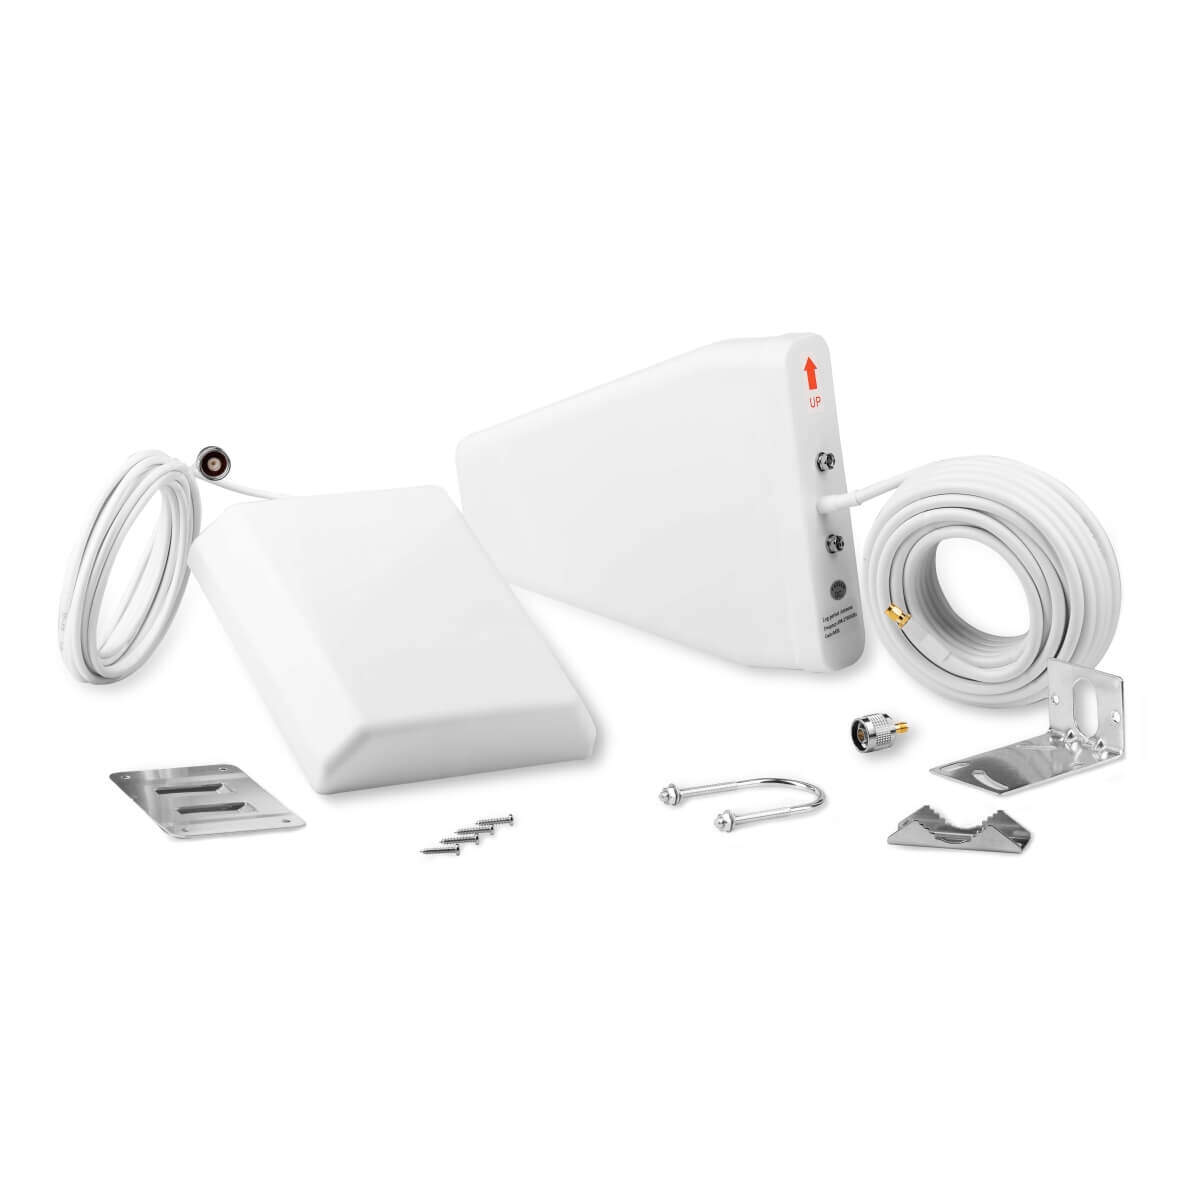 All-In-One Repeater Antenna Set